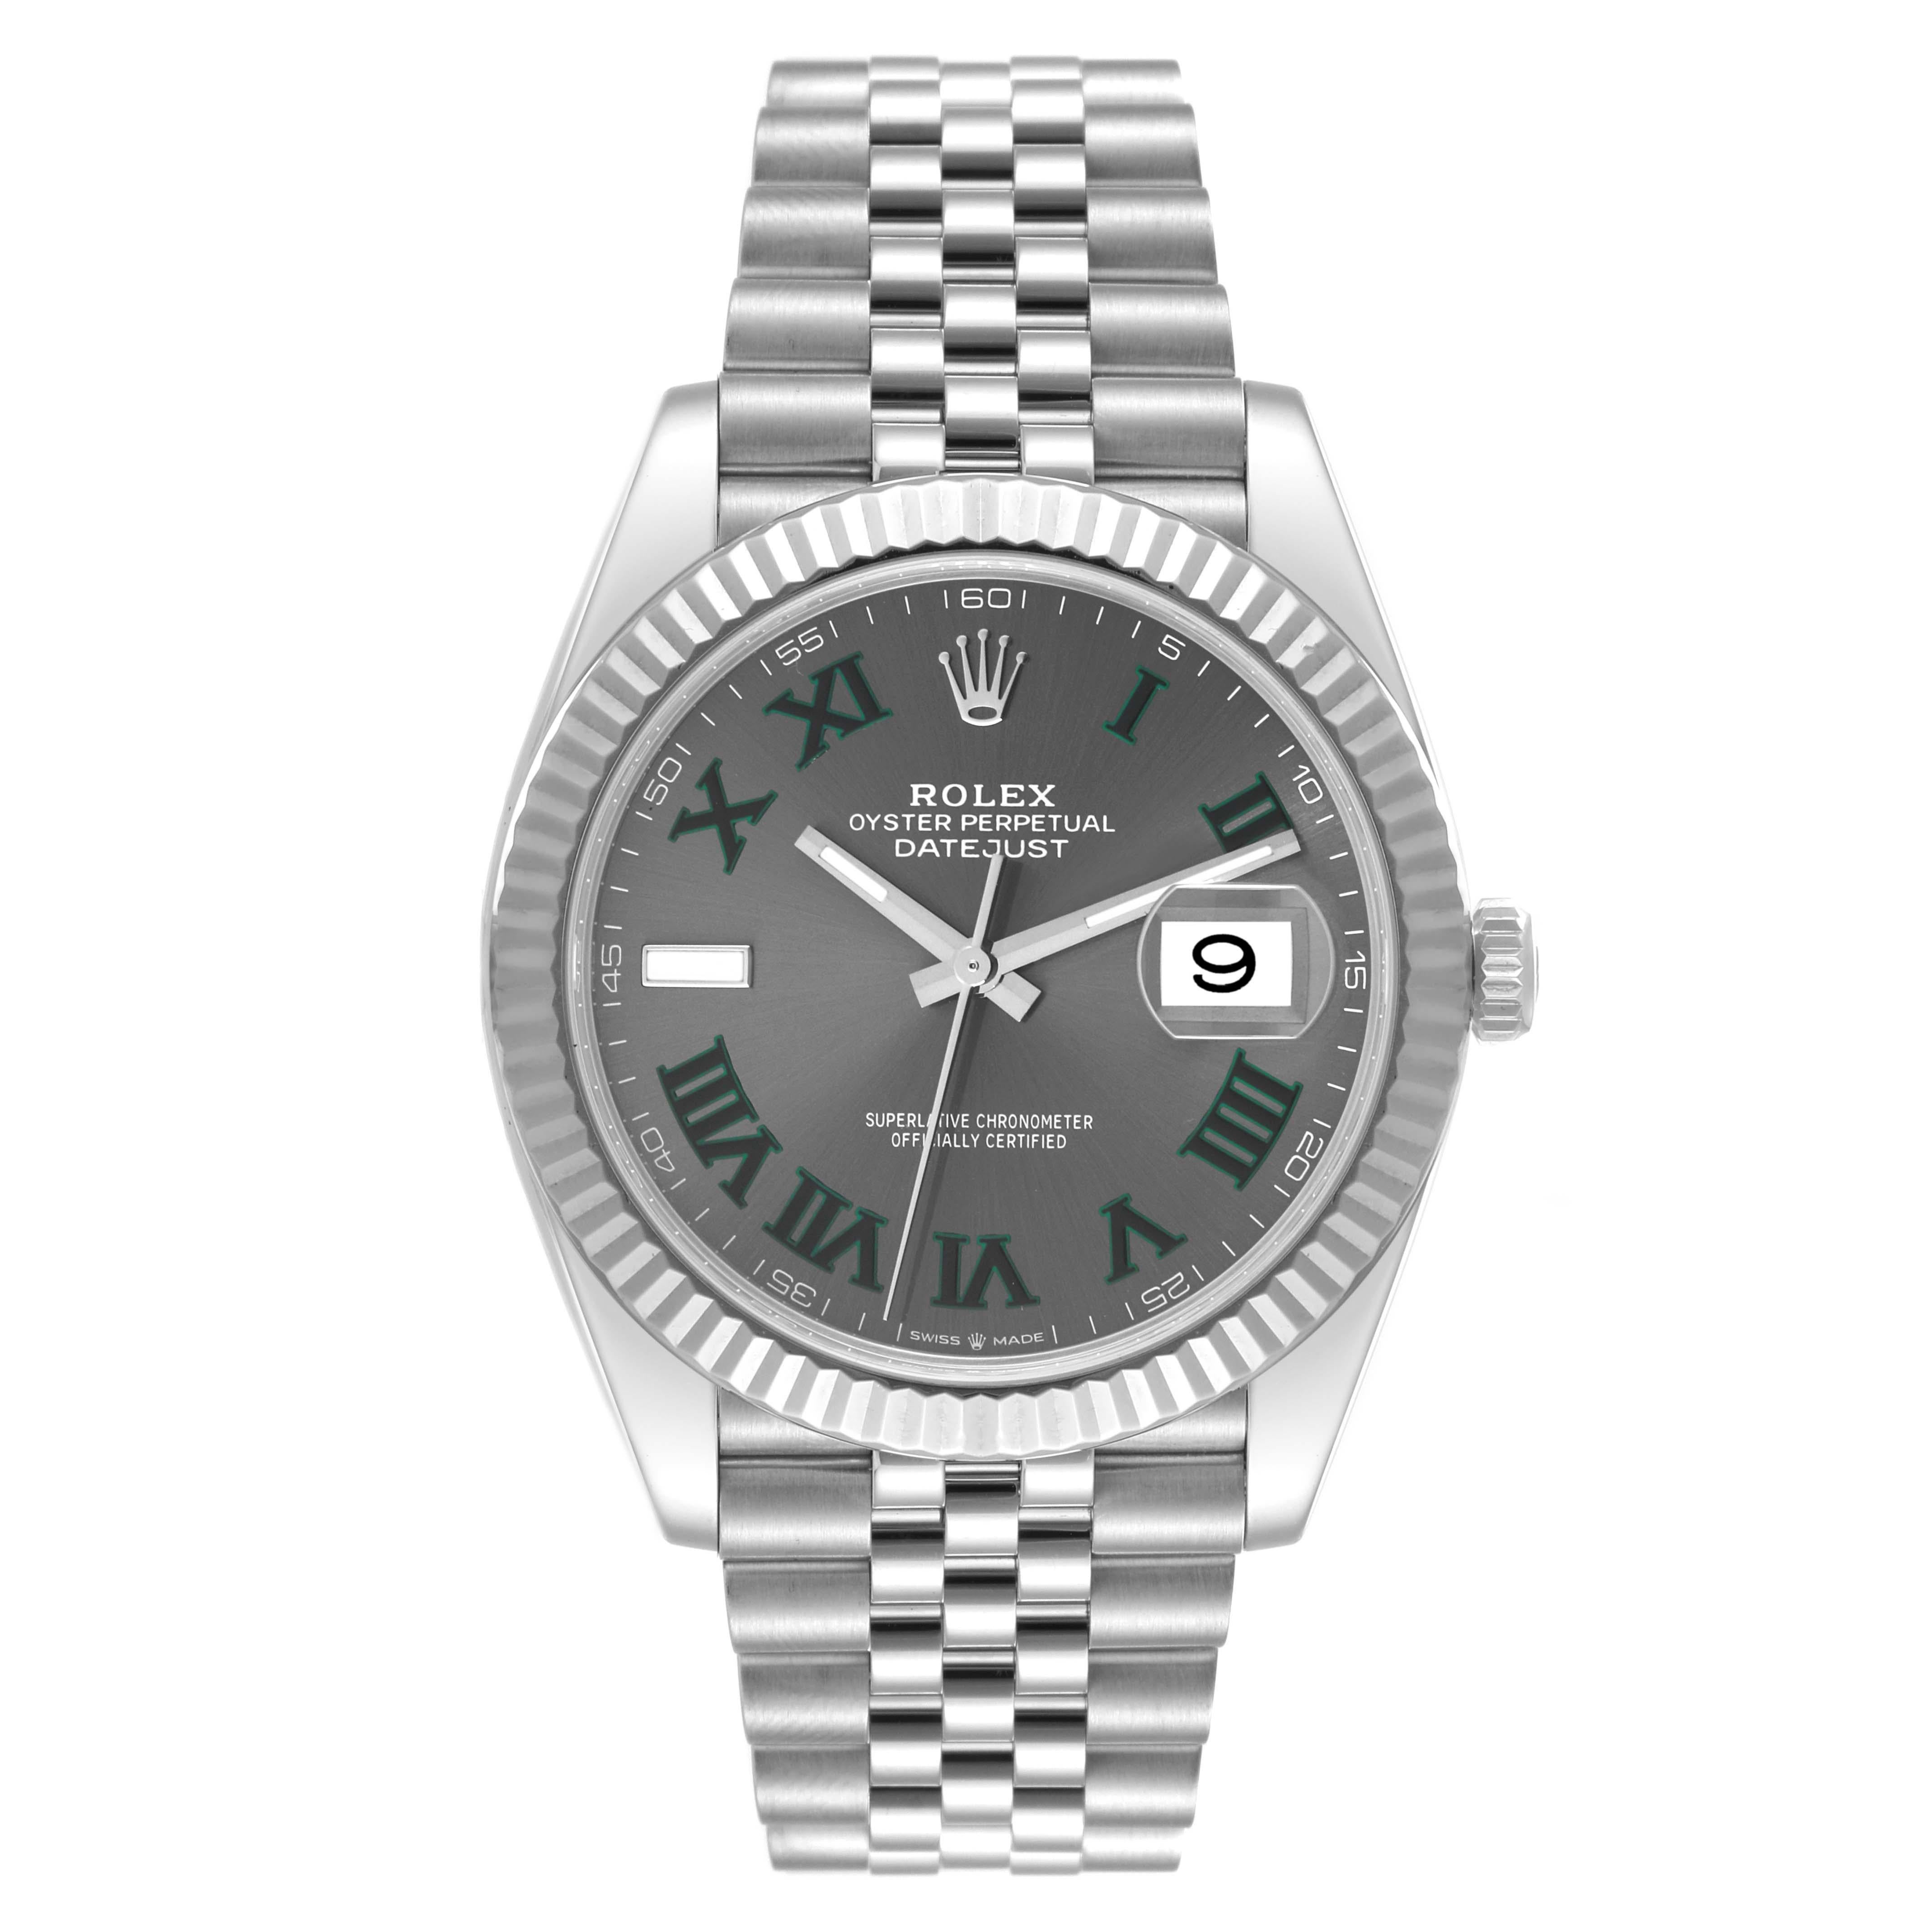 Rolex Datejust 41 Steel White Gold Wimbledon Dial Mens Watch 126334 Box Card. Officially certified chronometer automatic self-winding movement. Stainless steel case 41 mm in diameter. Rolex logo on a crown. 18K white gold fluted bezel. Scratch